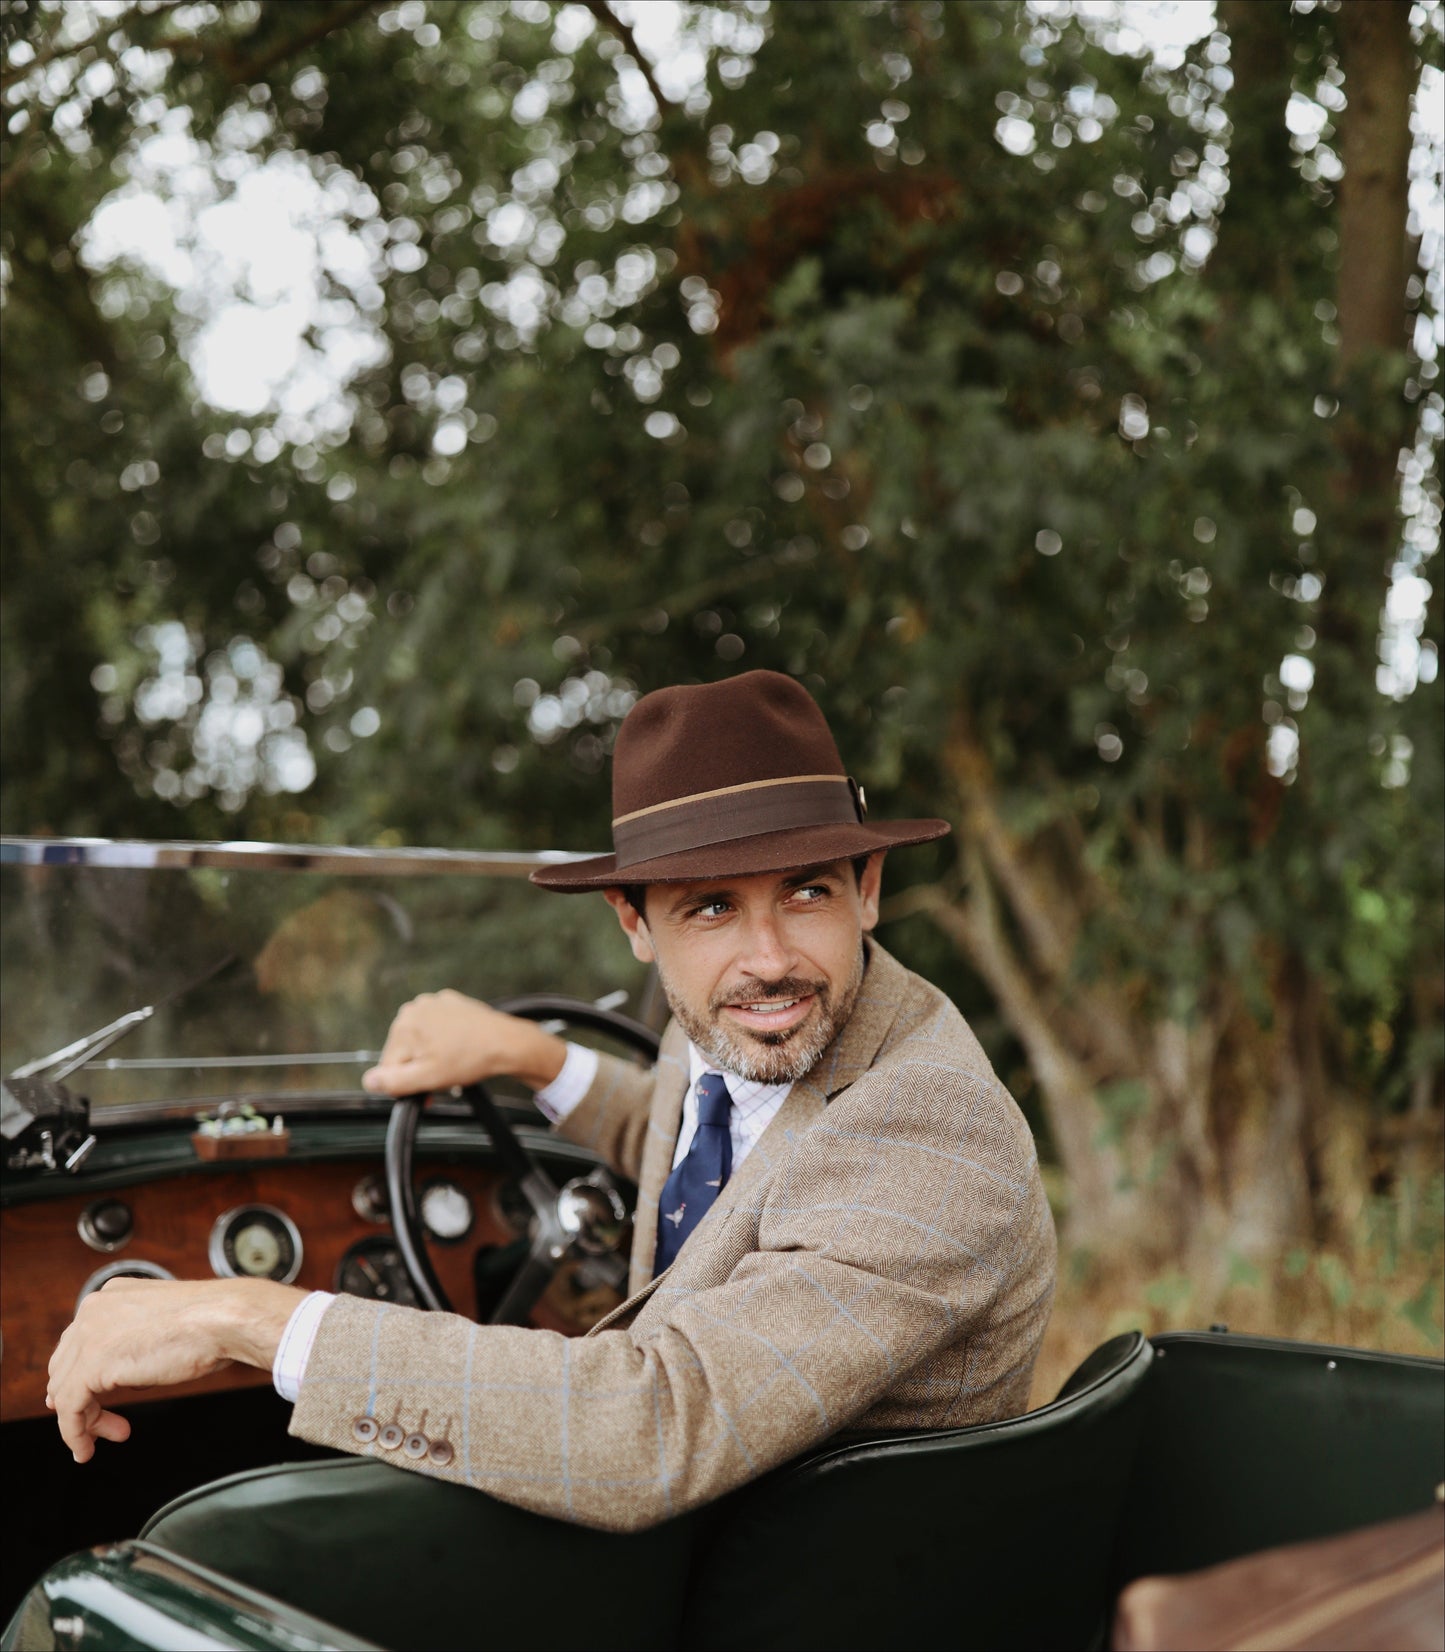 Hicks & Brown The Wingfield Trilby in Dark Brown